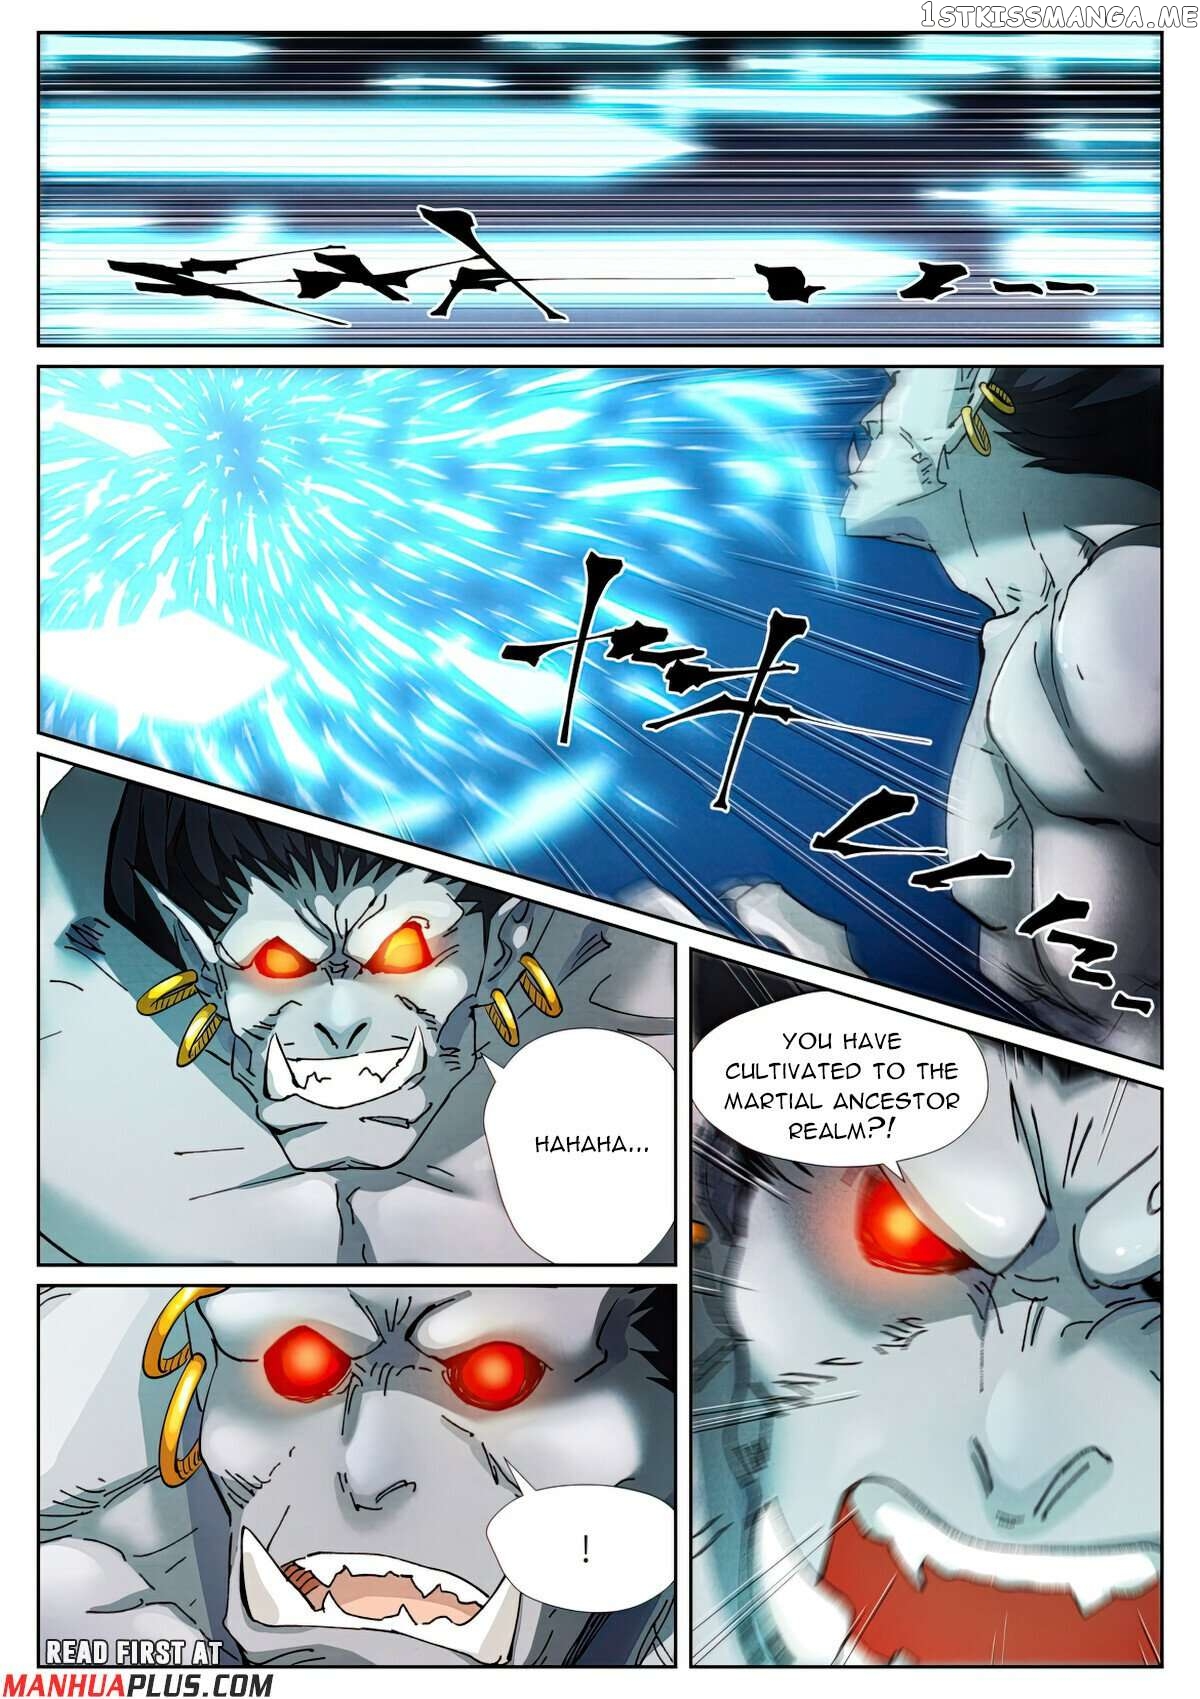 Tales of Demons and Gods Manhua Chapter 438.6 - Page 2